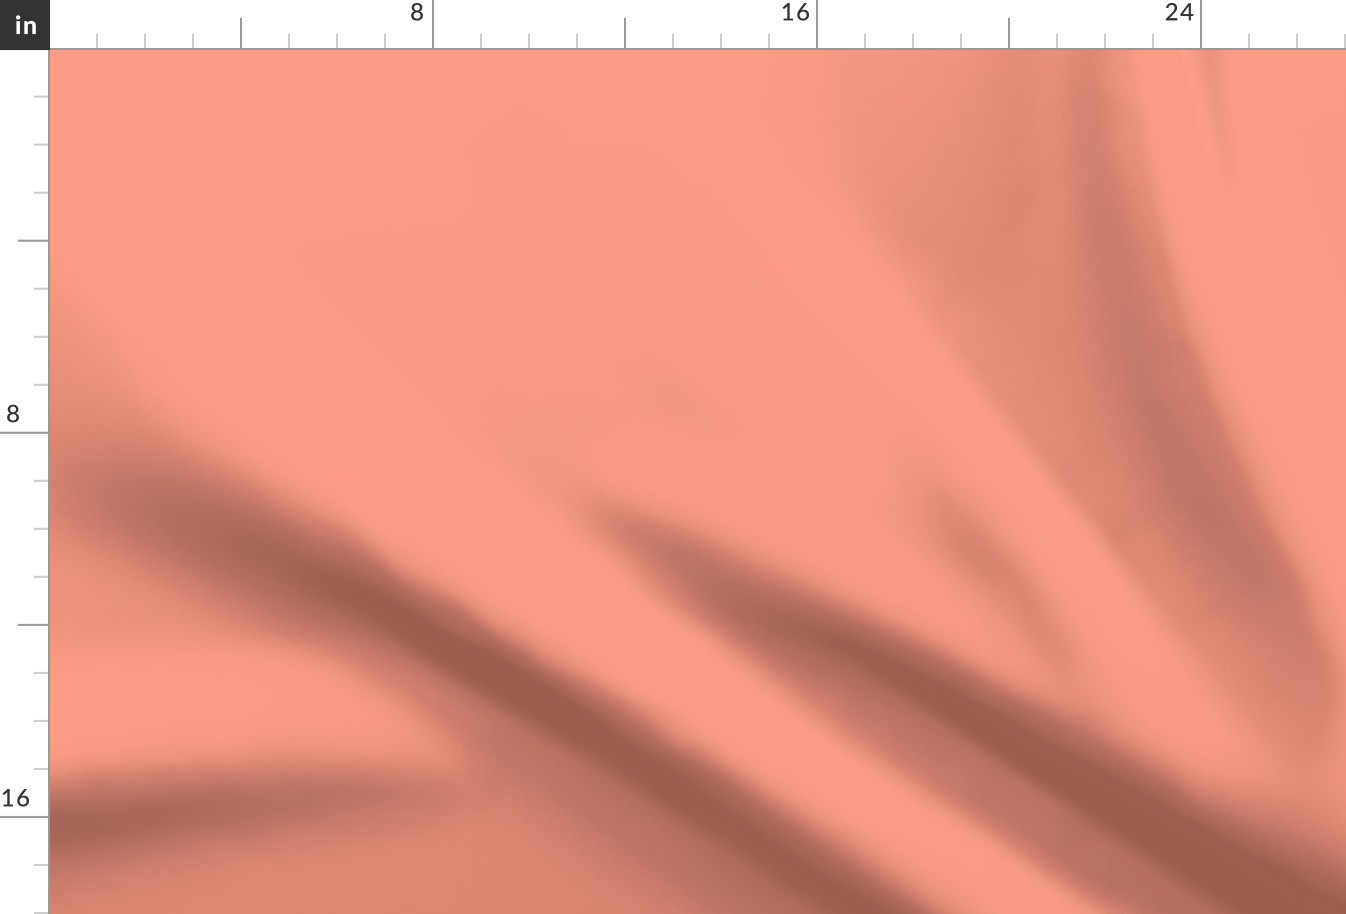 Peach Pink FA9A85, Solid, Coordinate to Pantone Color of the Year 2024 Peach Fuzz FFBE98